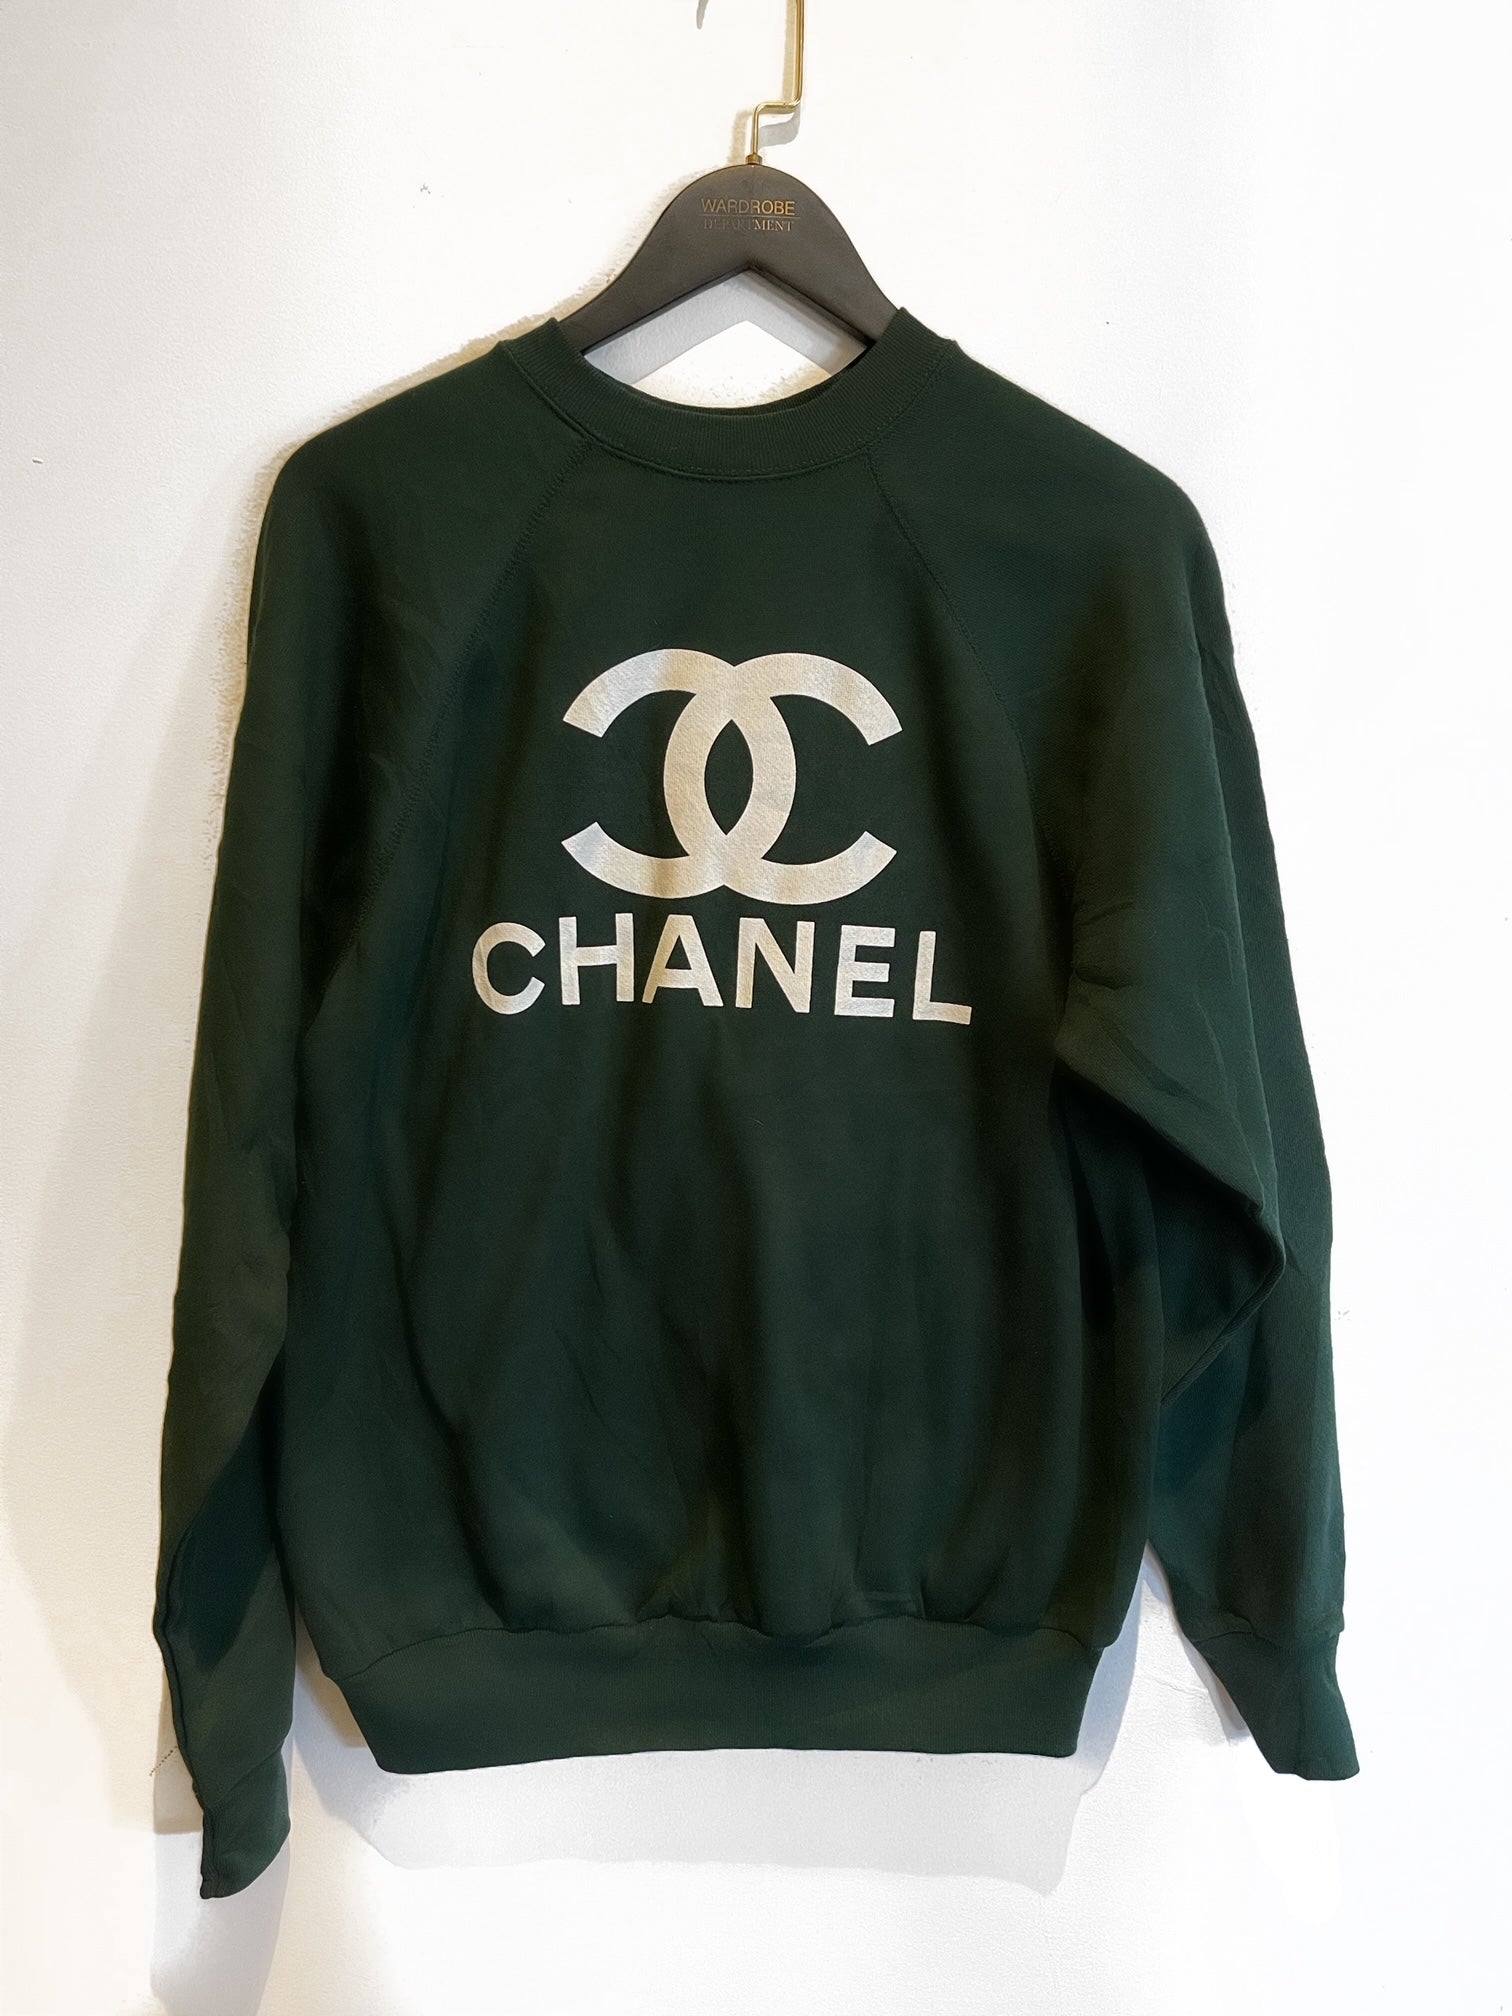 Vintage Chanel Inspired Stretch Knit Sweater  Friends NYC Vintage Shop